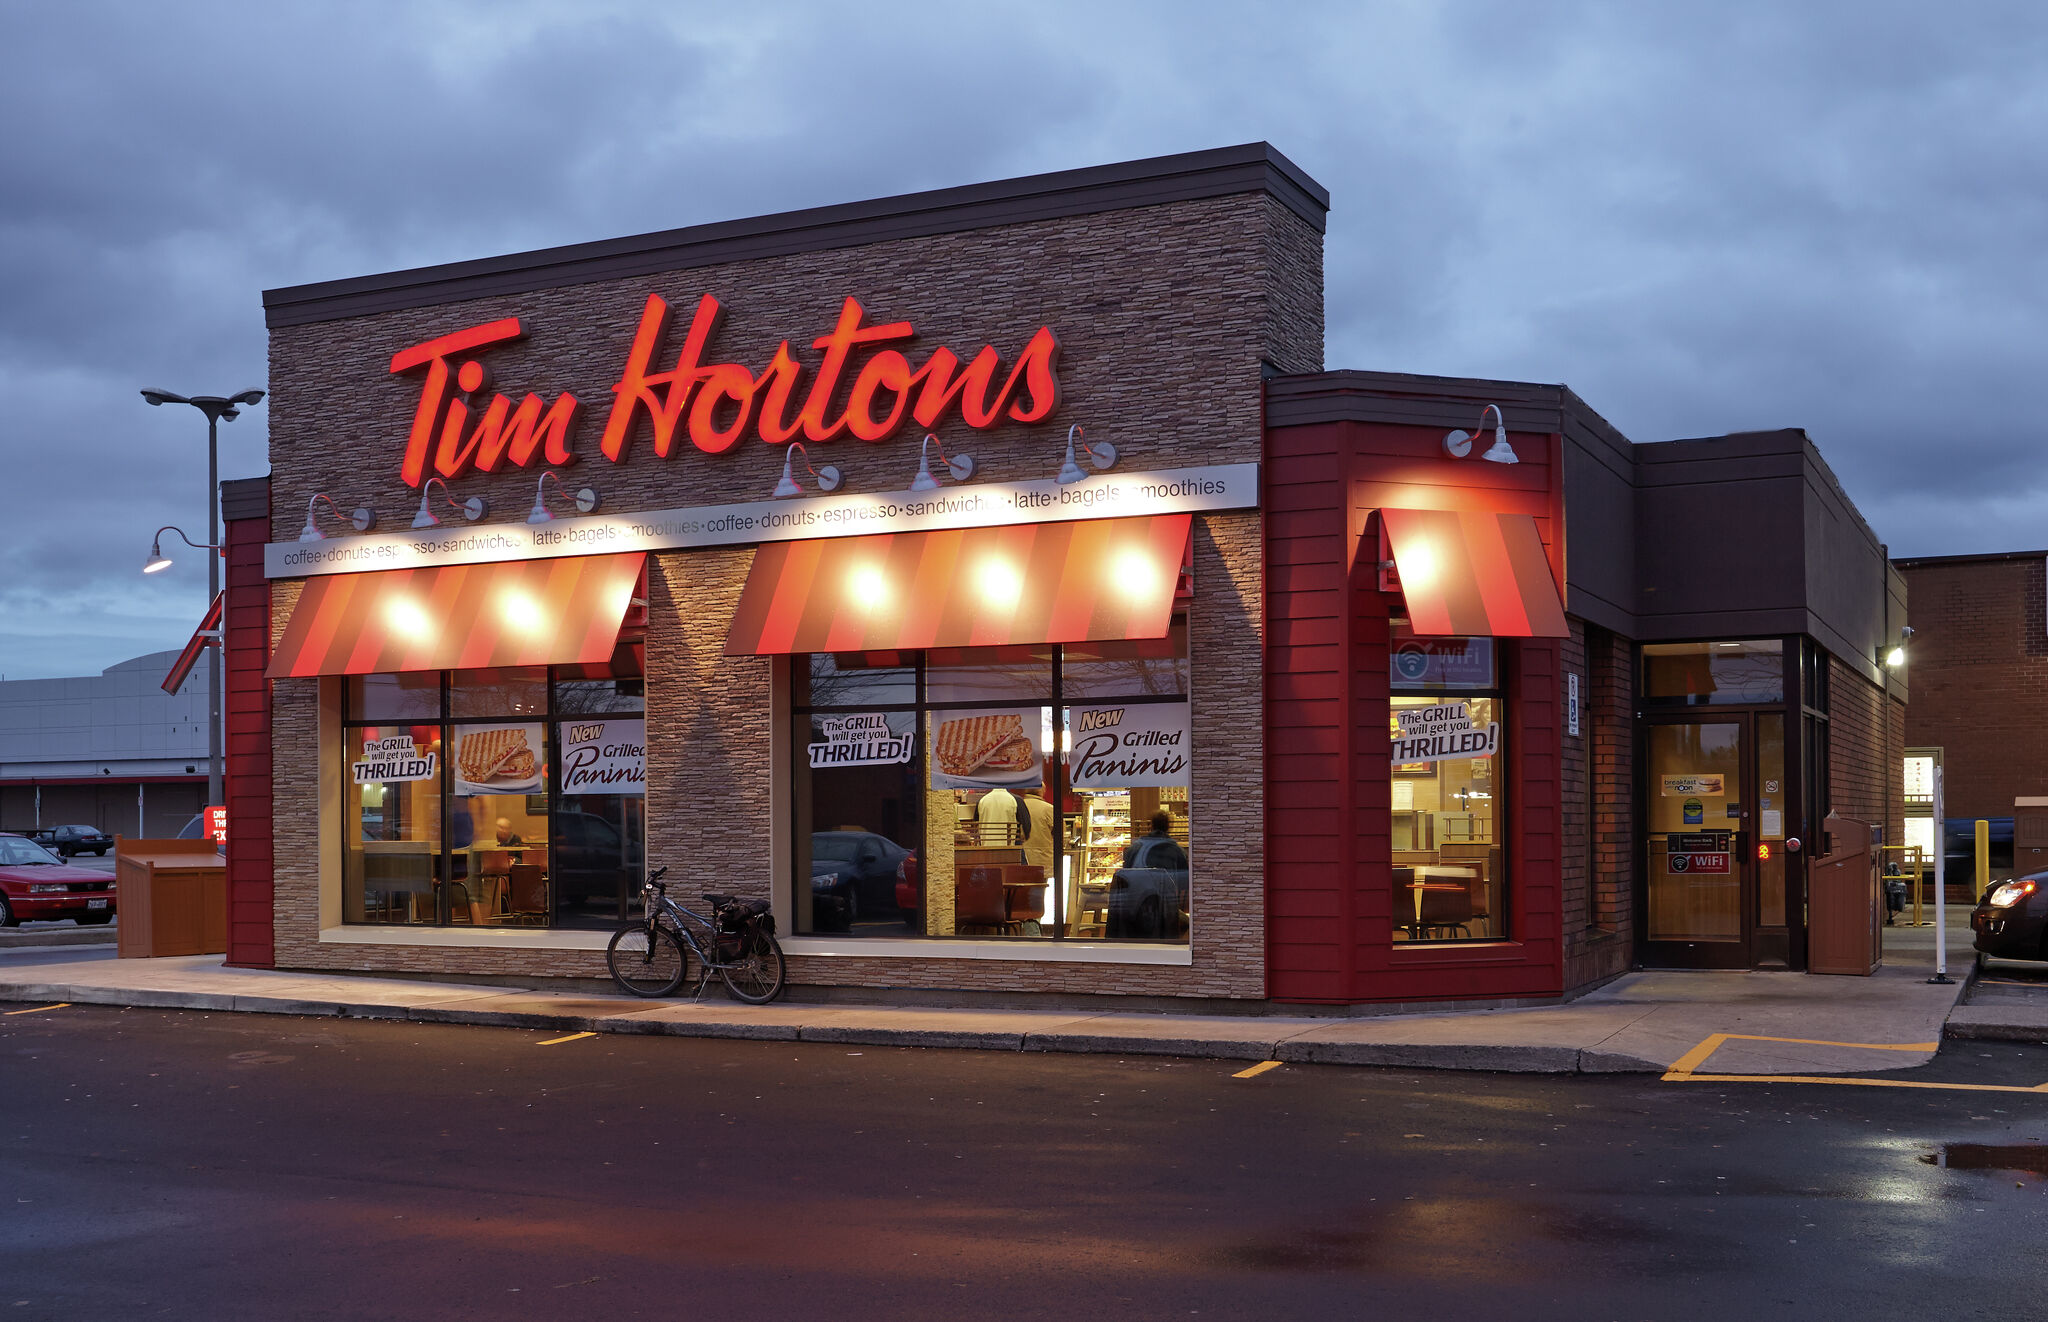 Cult-Favorite Tim Hortons Reveals First Houston-Area Locations